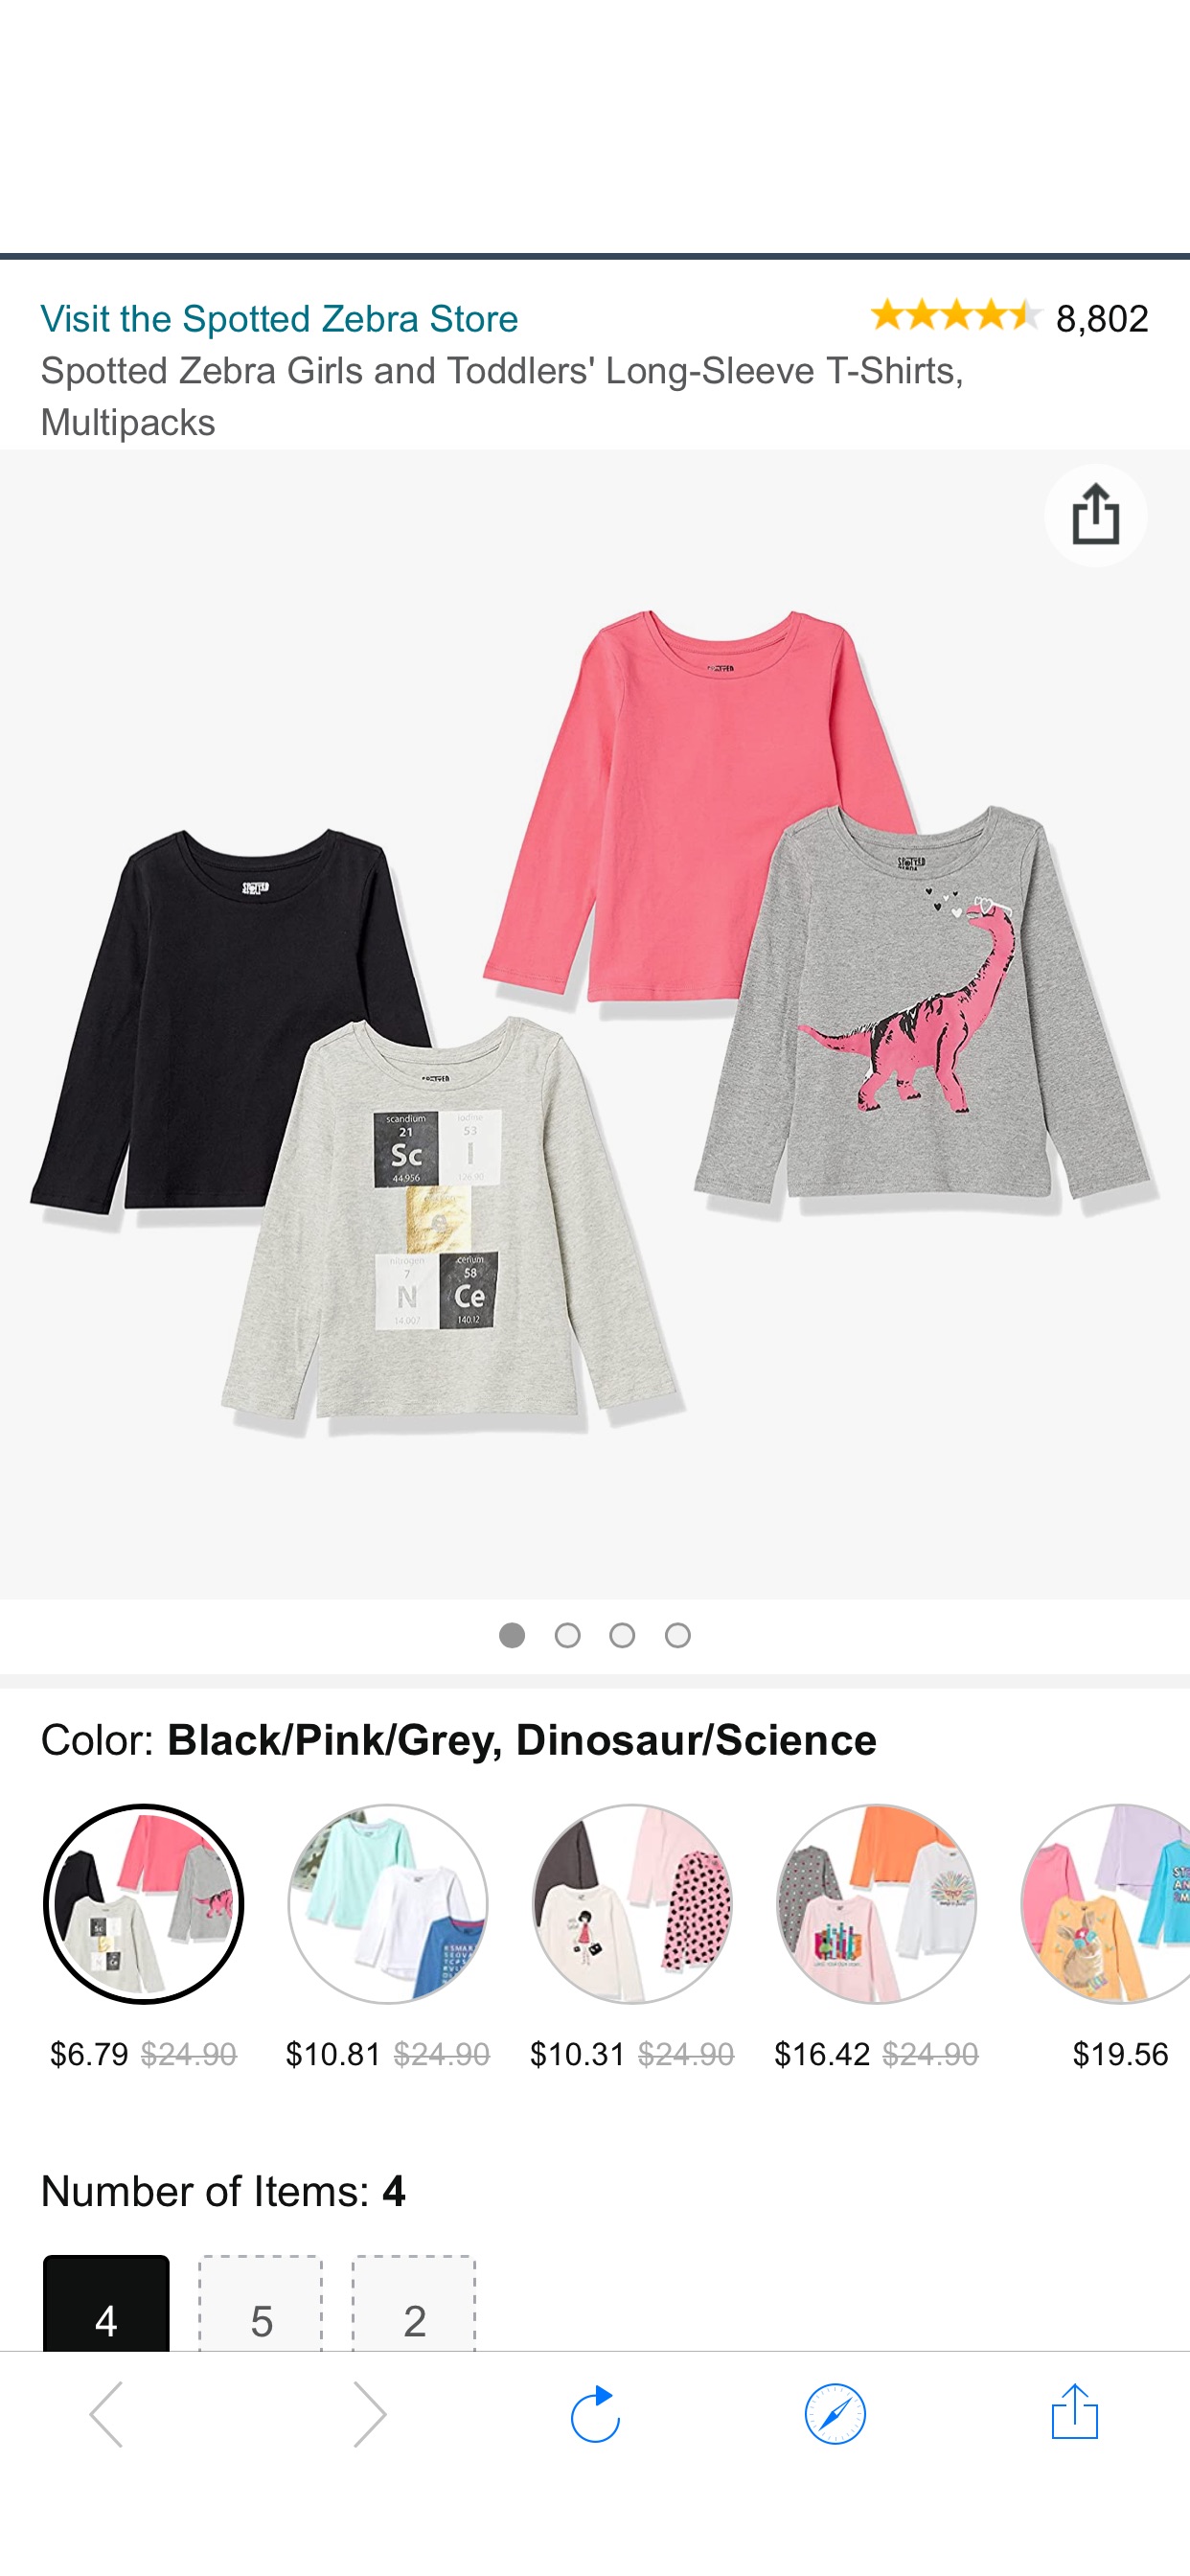 Amazon.com: Spotted Zebra Girls' Long-Sleeve T-Shirts, Pack of 4, Charcoal Heather/Light Pink/Pink, Meow, Medium : Clothing, Shoes & Jewelry T恤 L码